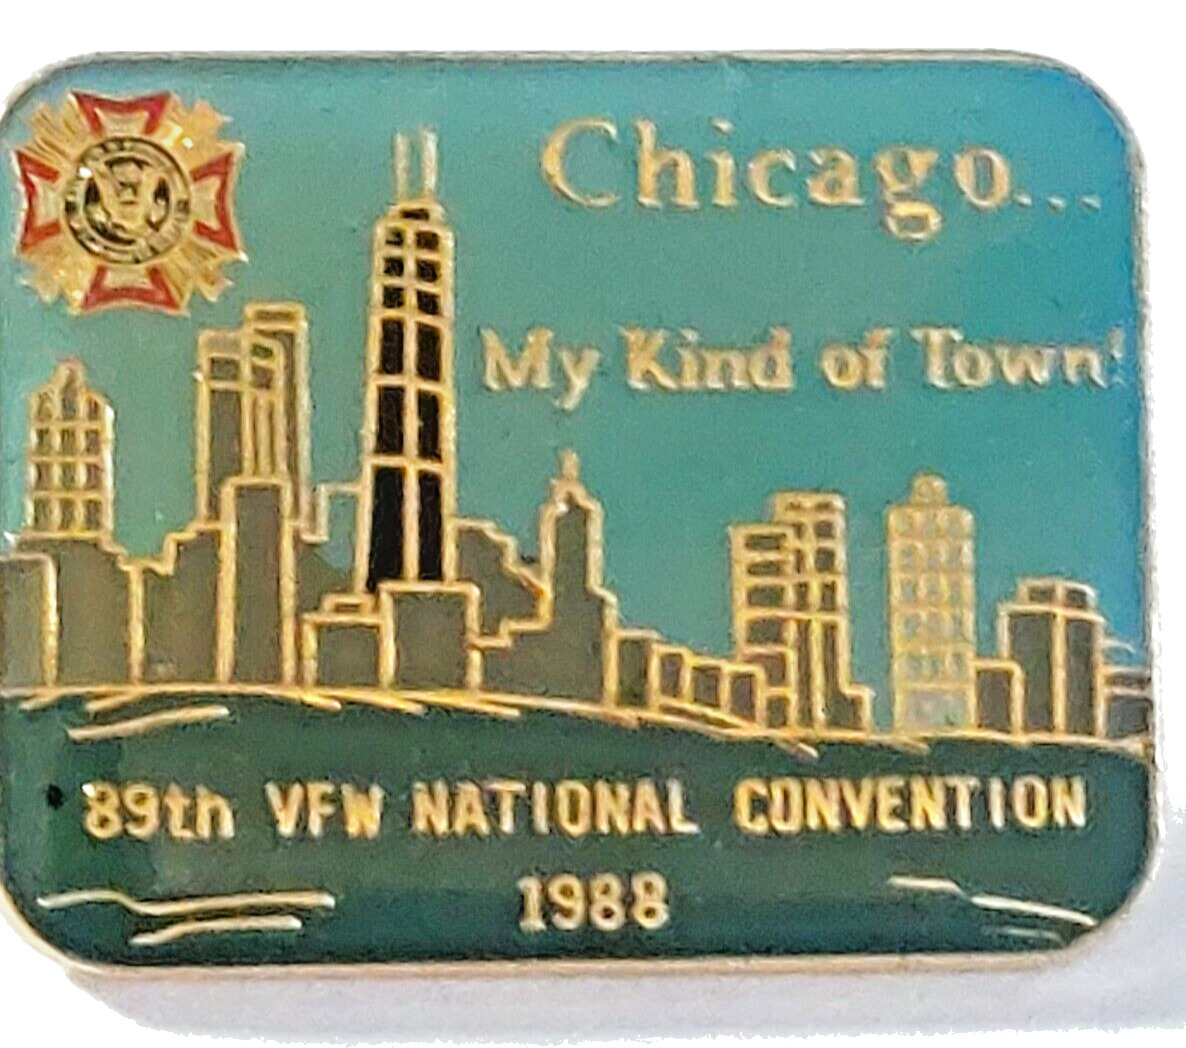 VFW 1988 89th National Convention Chicago My Kind of Town Lapel Pin (080423)